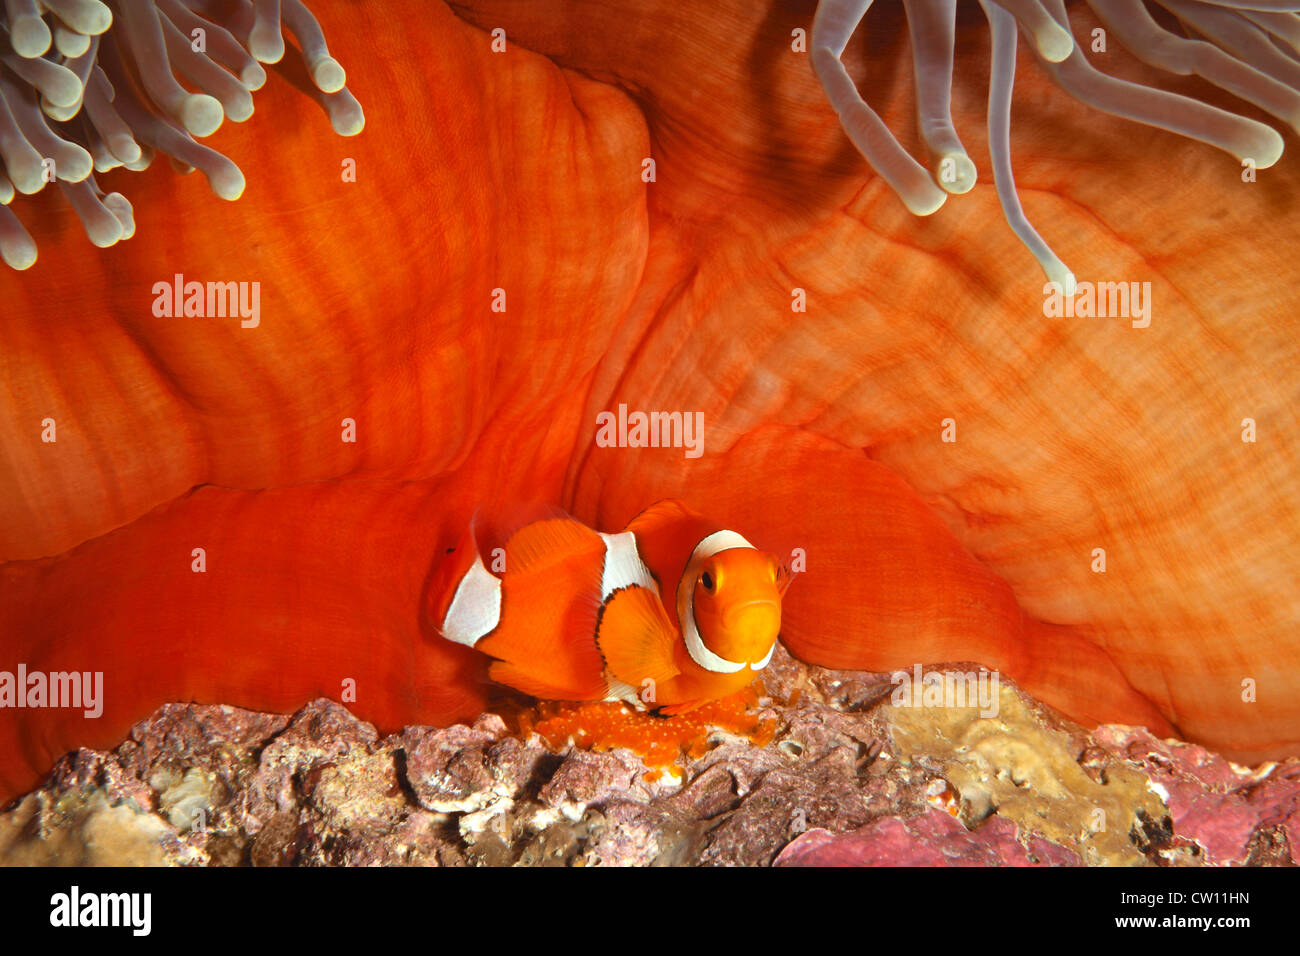 A Clown Anemonefish, Amphiprion percula, tending eggs laid at the base of the host Magnificent Anemone, Heteractis magnifica. Stock Photo